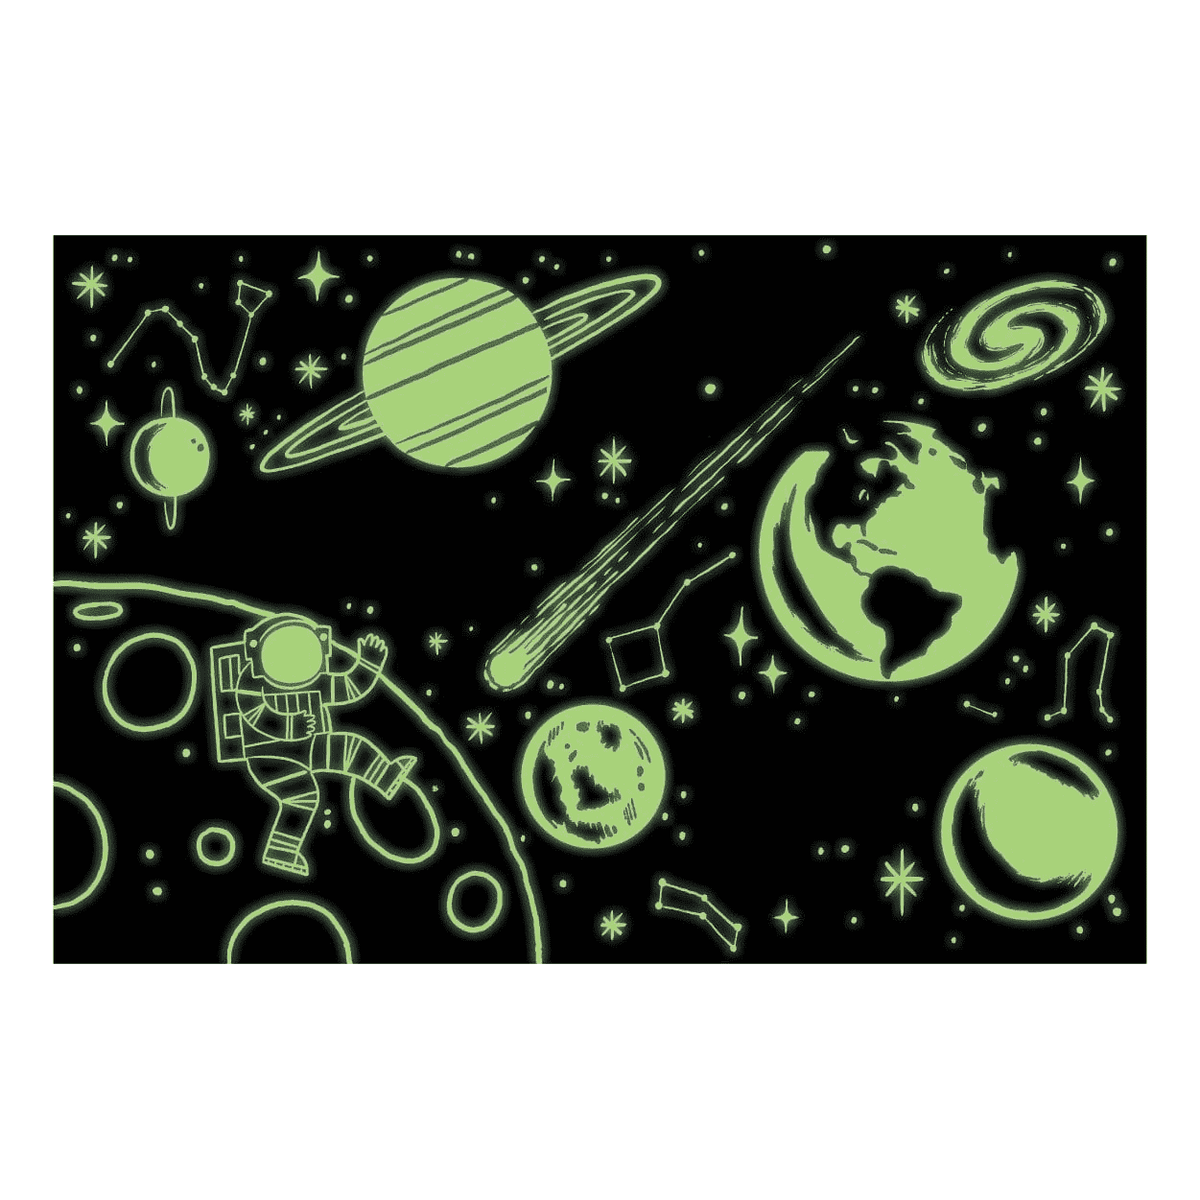 Mudpuppy Glow In The Dark Puzzle - Outer Space